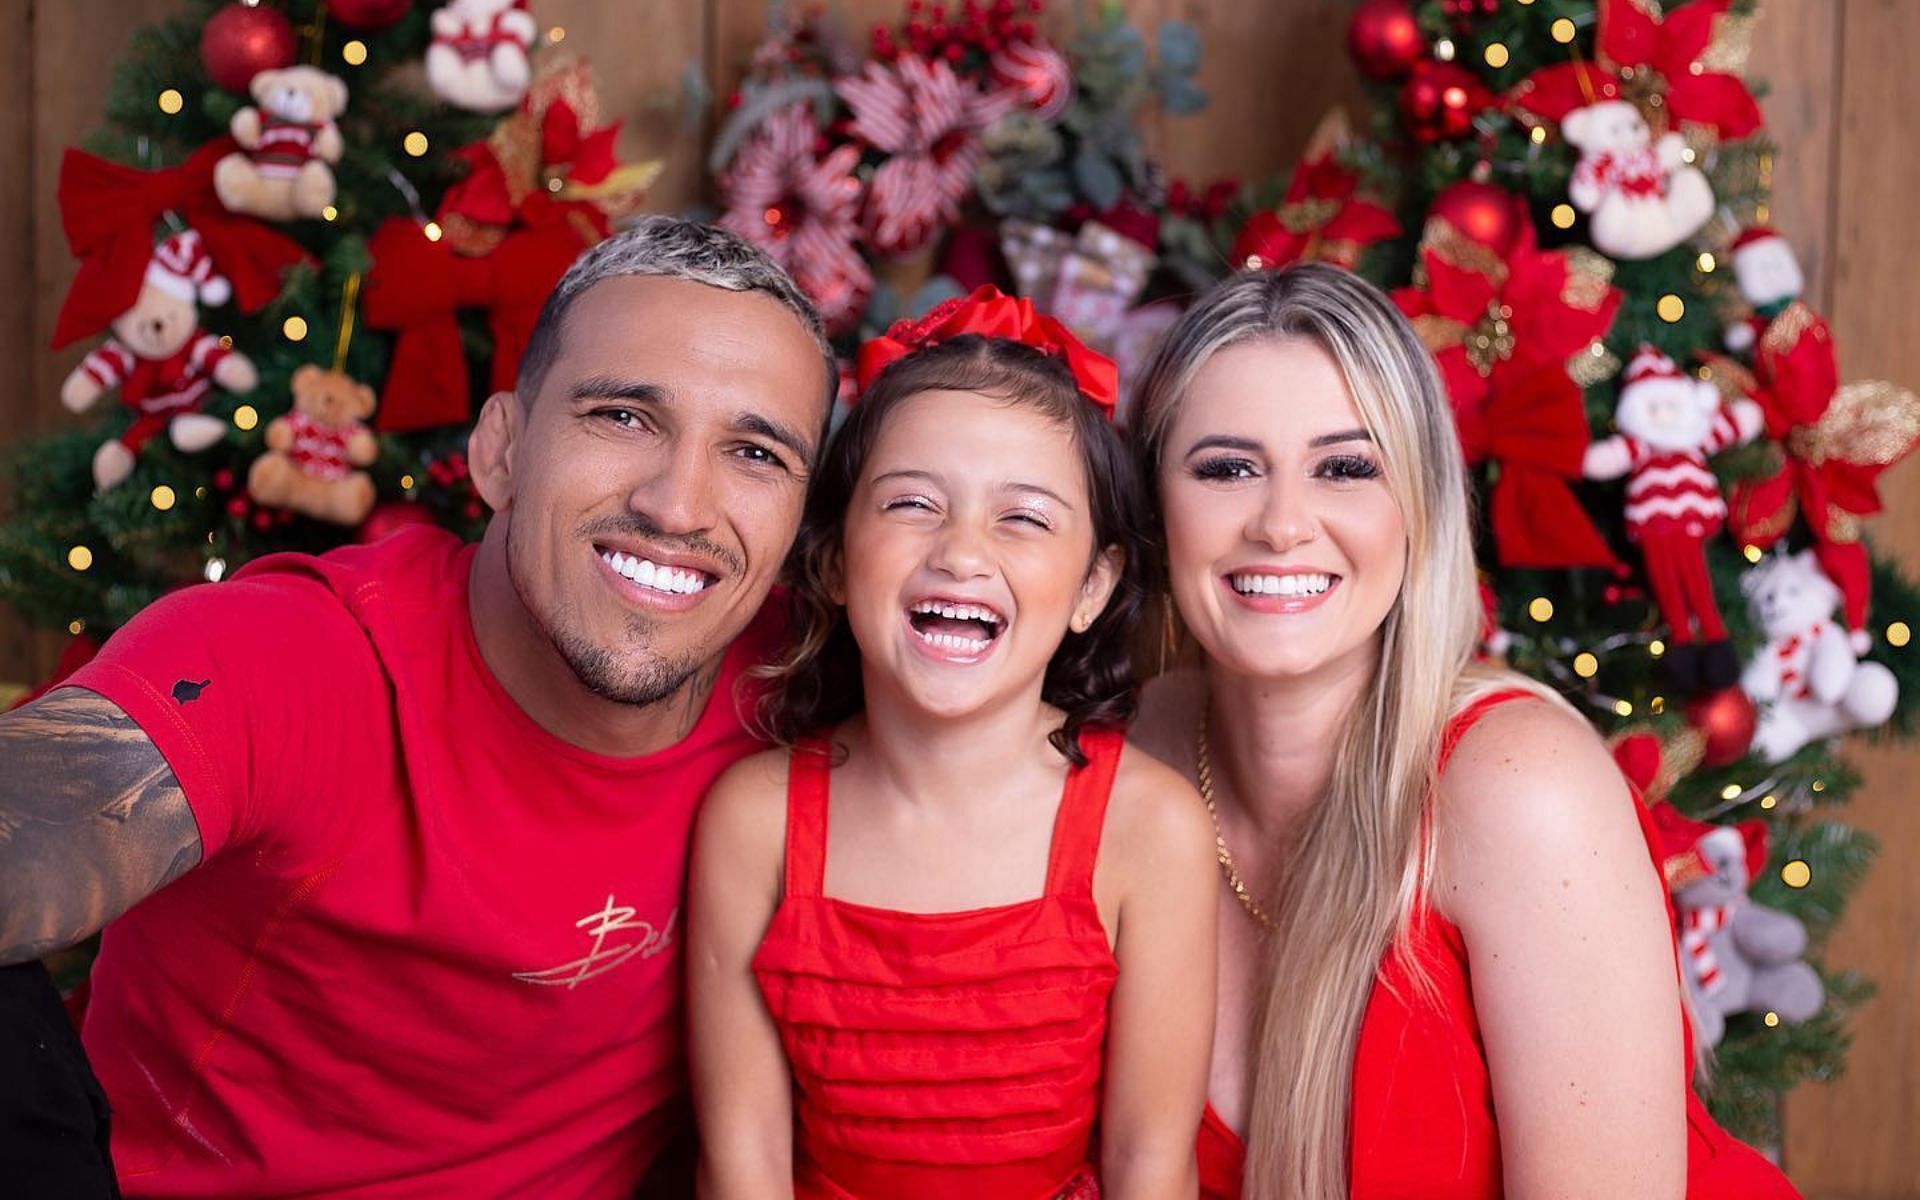 Charles Oliveira(left) with his daughter Tayla (middle) and wife Talita Roberta Pereira (right) [Image credits: @taylasoliveira on Instagram]